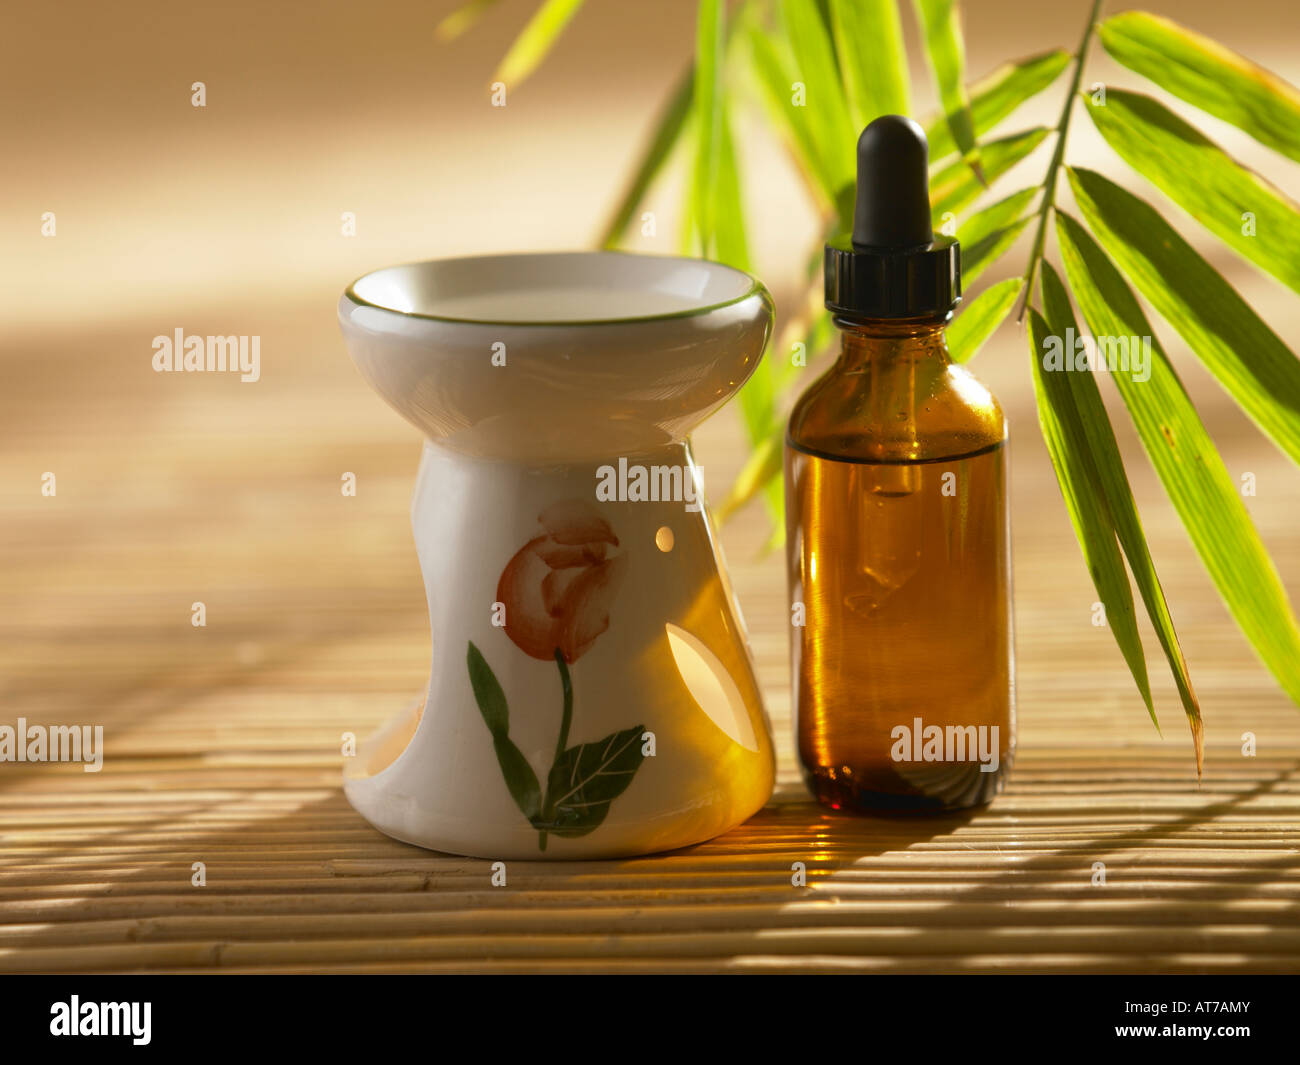 Essential oil burner and bottle on bamboo mat Stock Photo